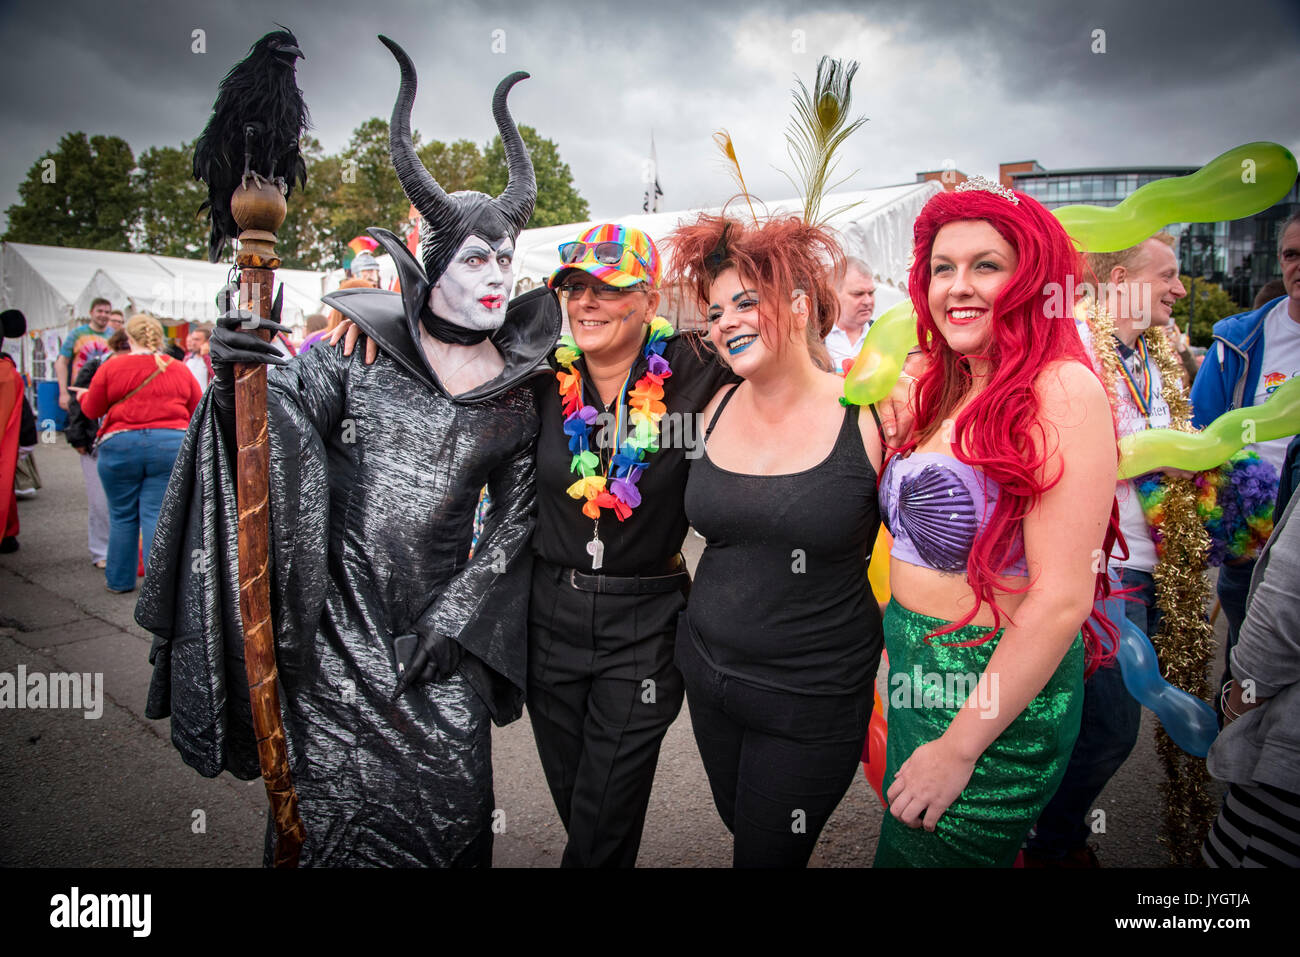 Chester. United Kingdom. 19th August 2017. Scenes from the Chester Pride parade today in the centre of Chester. Hundreds turned out in the rain to take part in LGBT celebration with many dressed in colourfull costumes. The event is supported by local business. Credit: John Davidson Photos/Alamy Live News Stock Photo